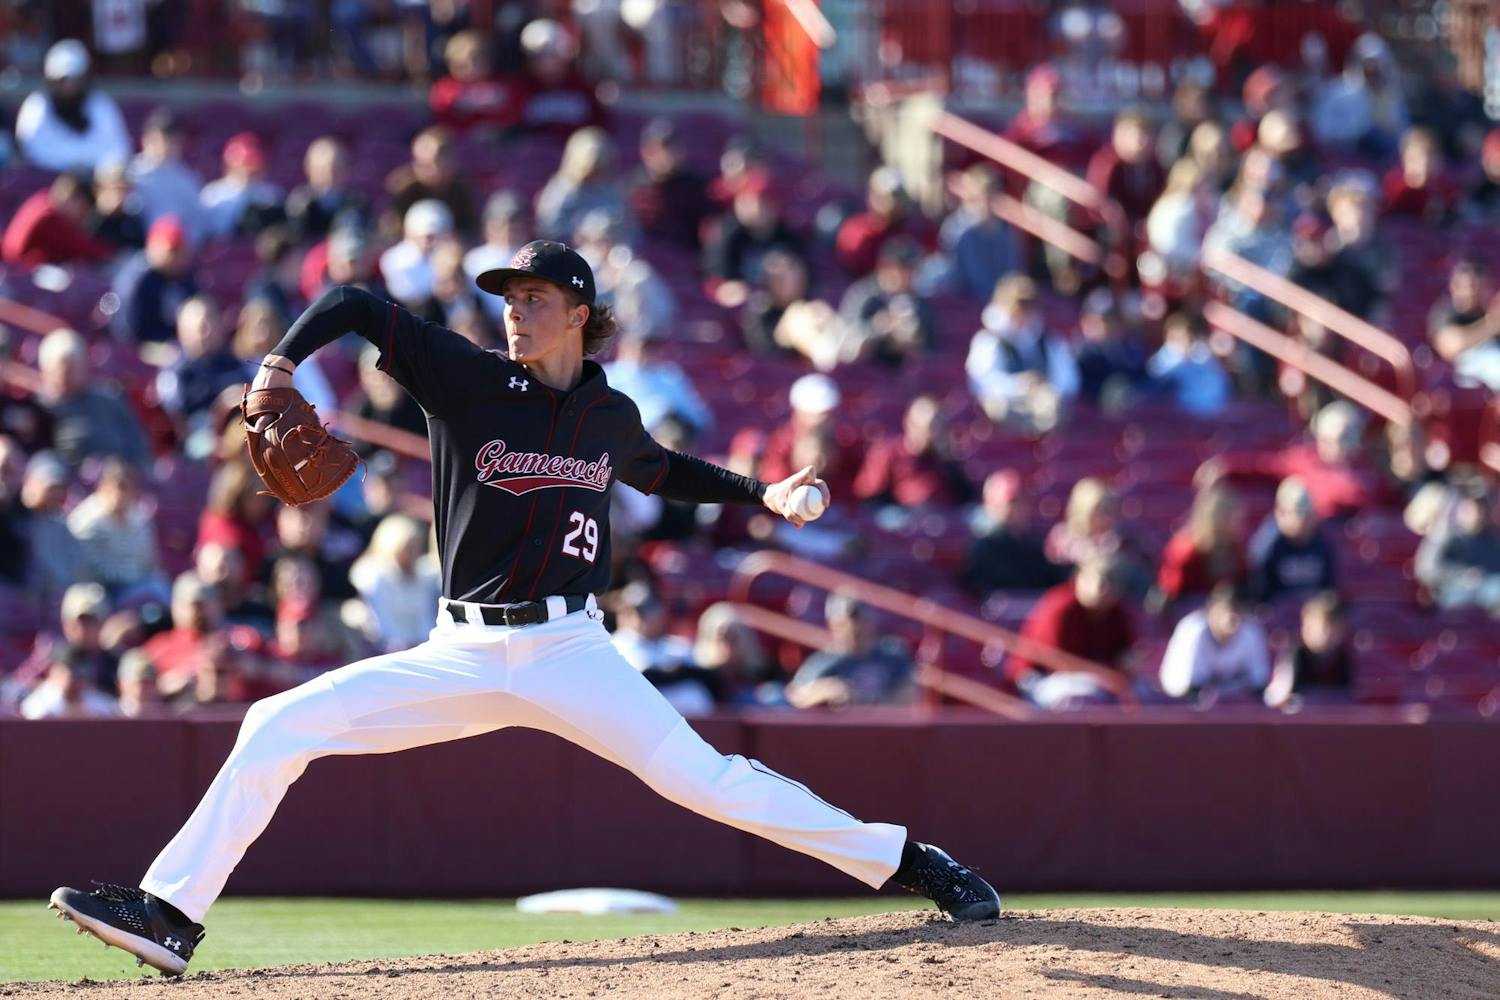 Junior pitcher Matthew Becker throws the ball during South Carolina's game against Belmont at Founders Park on Feb. 25, 2024. Becker had two hits allowed during the Gamecocks' 12-1 win against the Bruins.